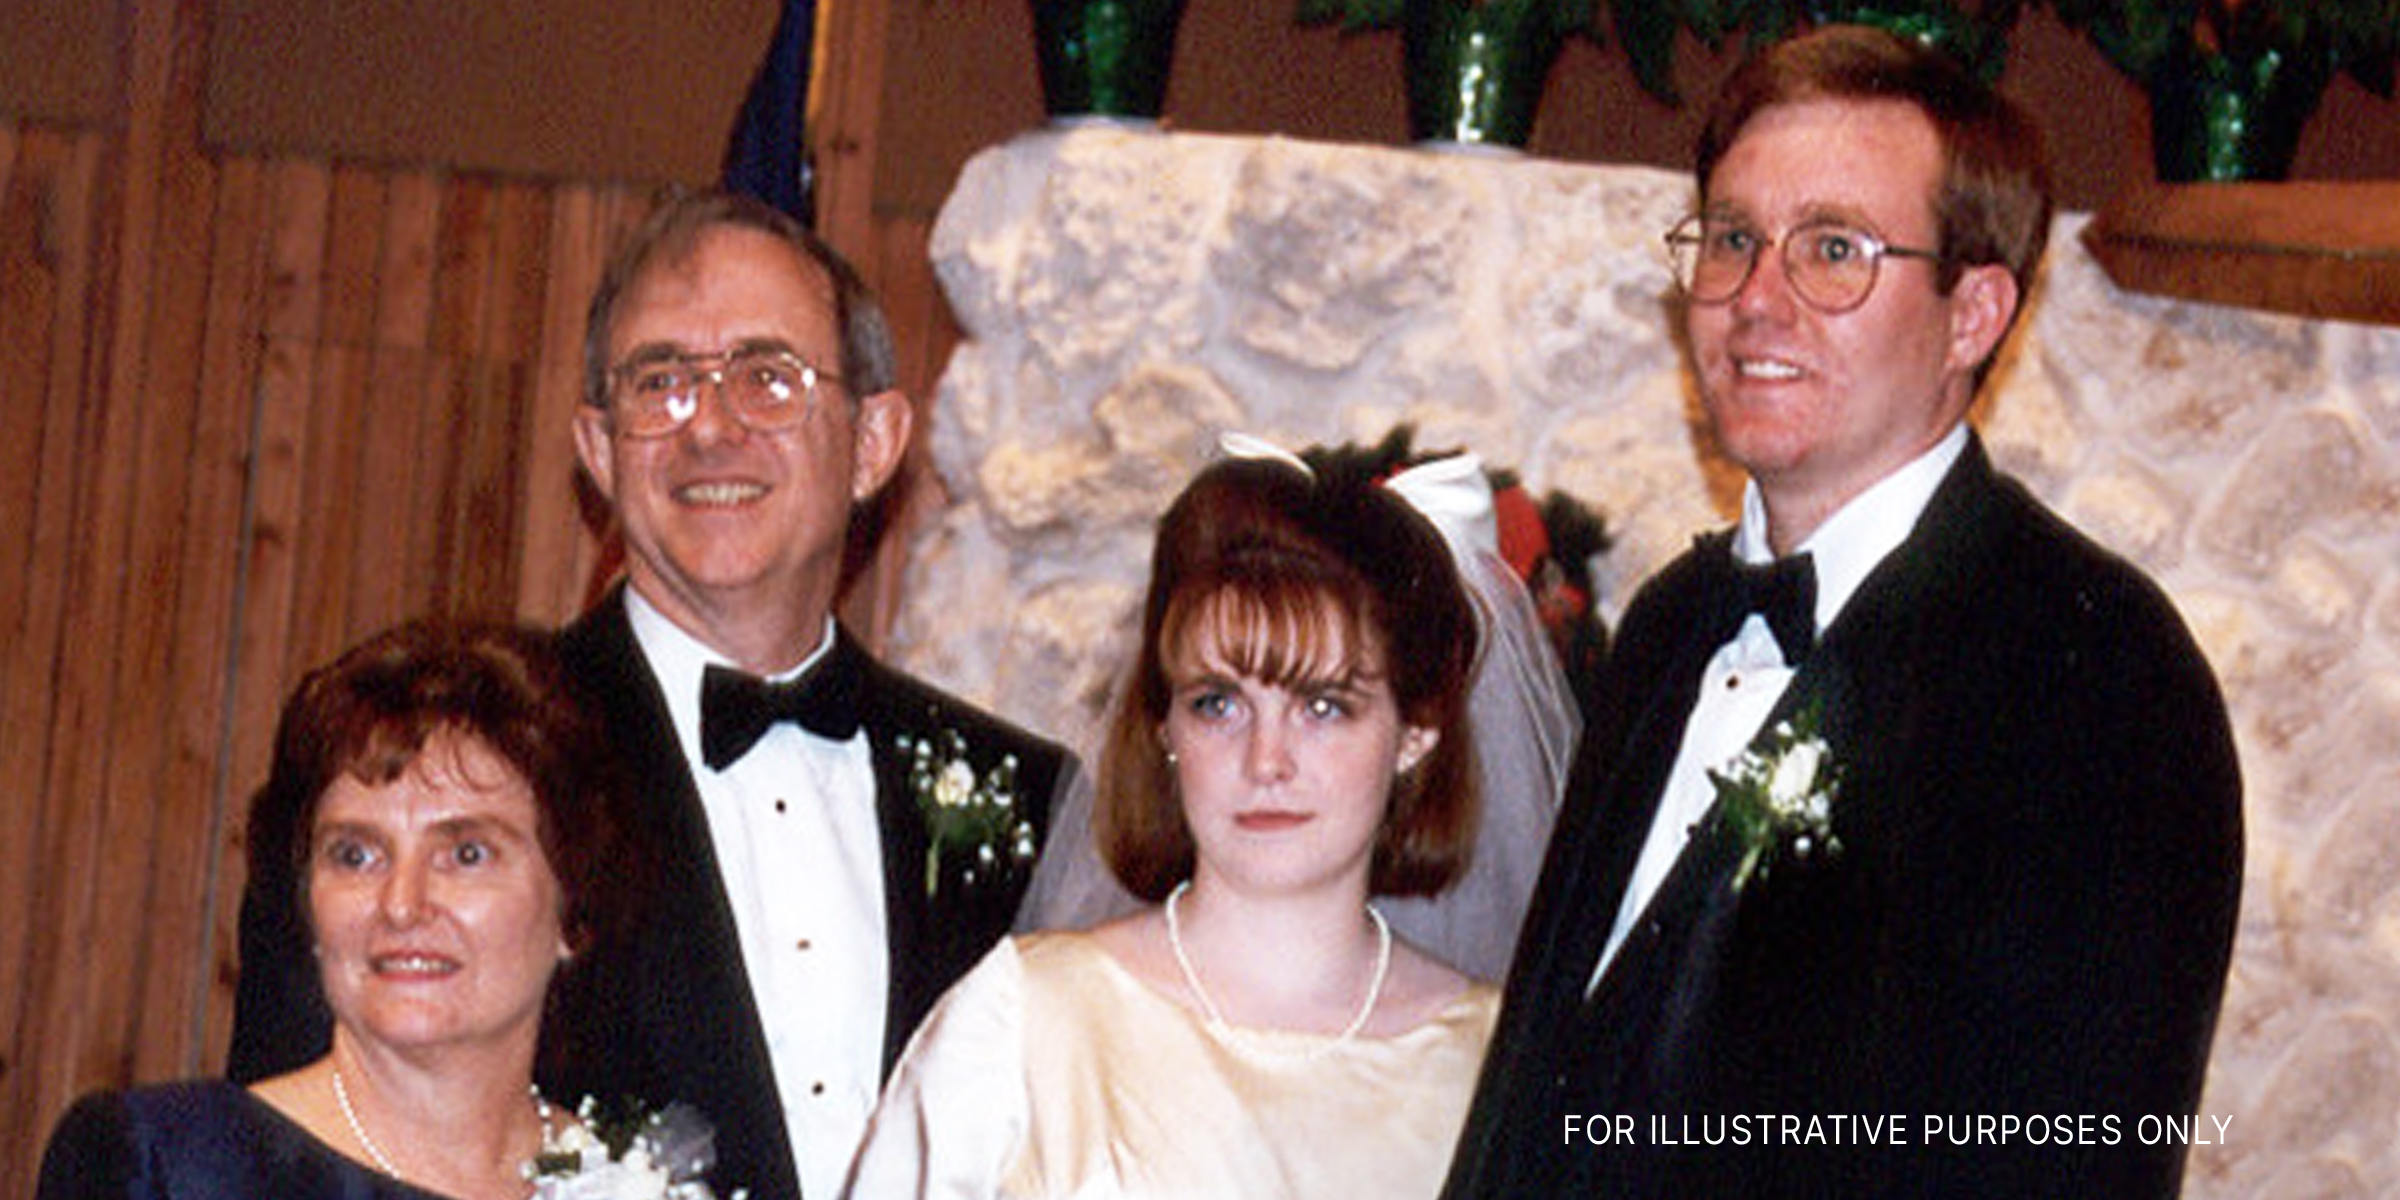 A bride and groom with an older couple | Source: flickr.com/wjarrettc/CC BY 2.0